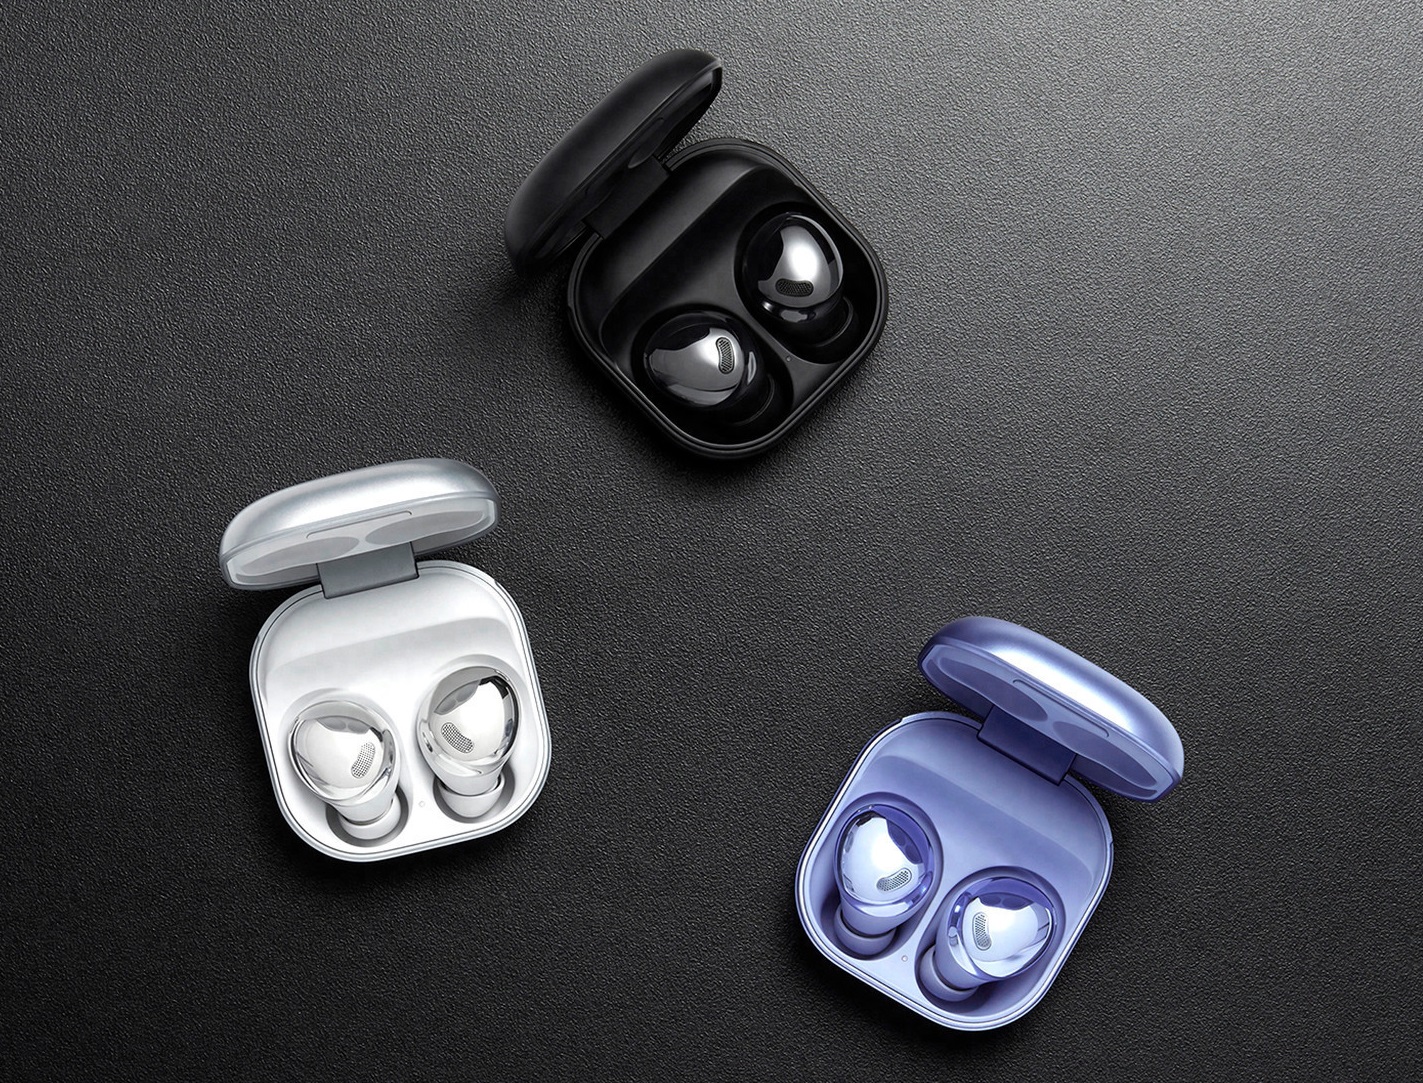 Samsung Galaxy Buds 2: Details, images, and pricing of imminent ANC earbuds revealed ahead of launch - NotebookCheck.net News